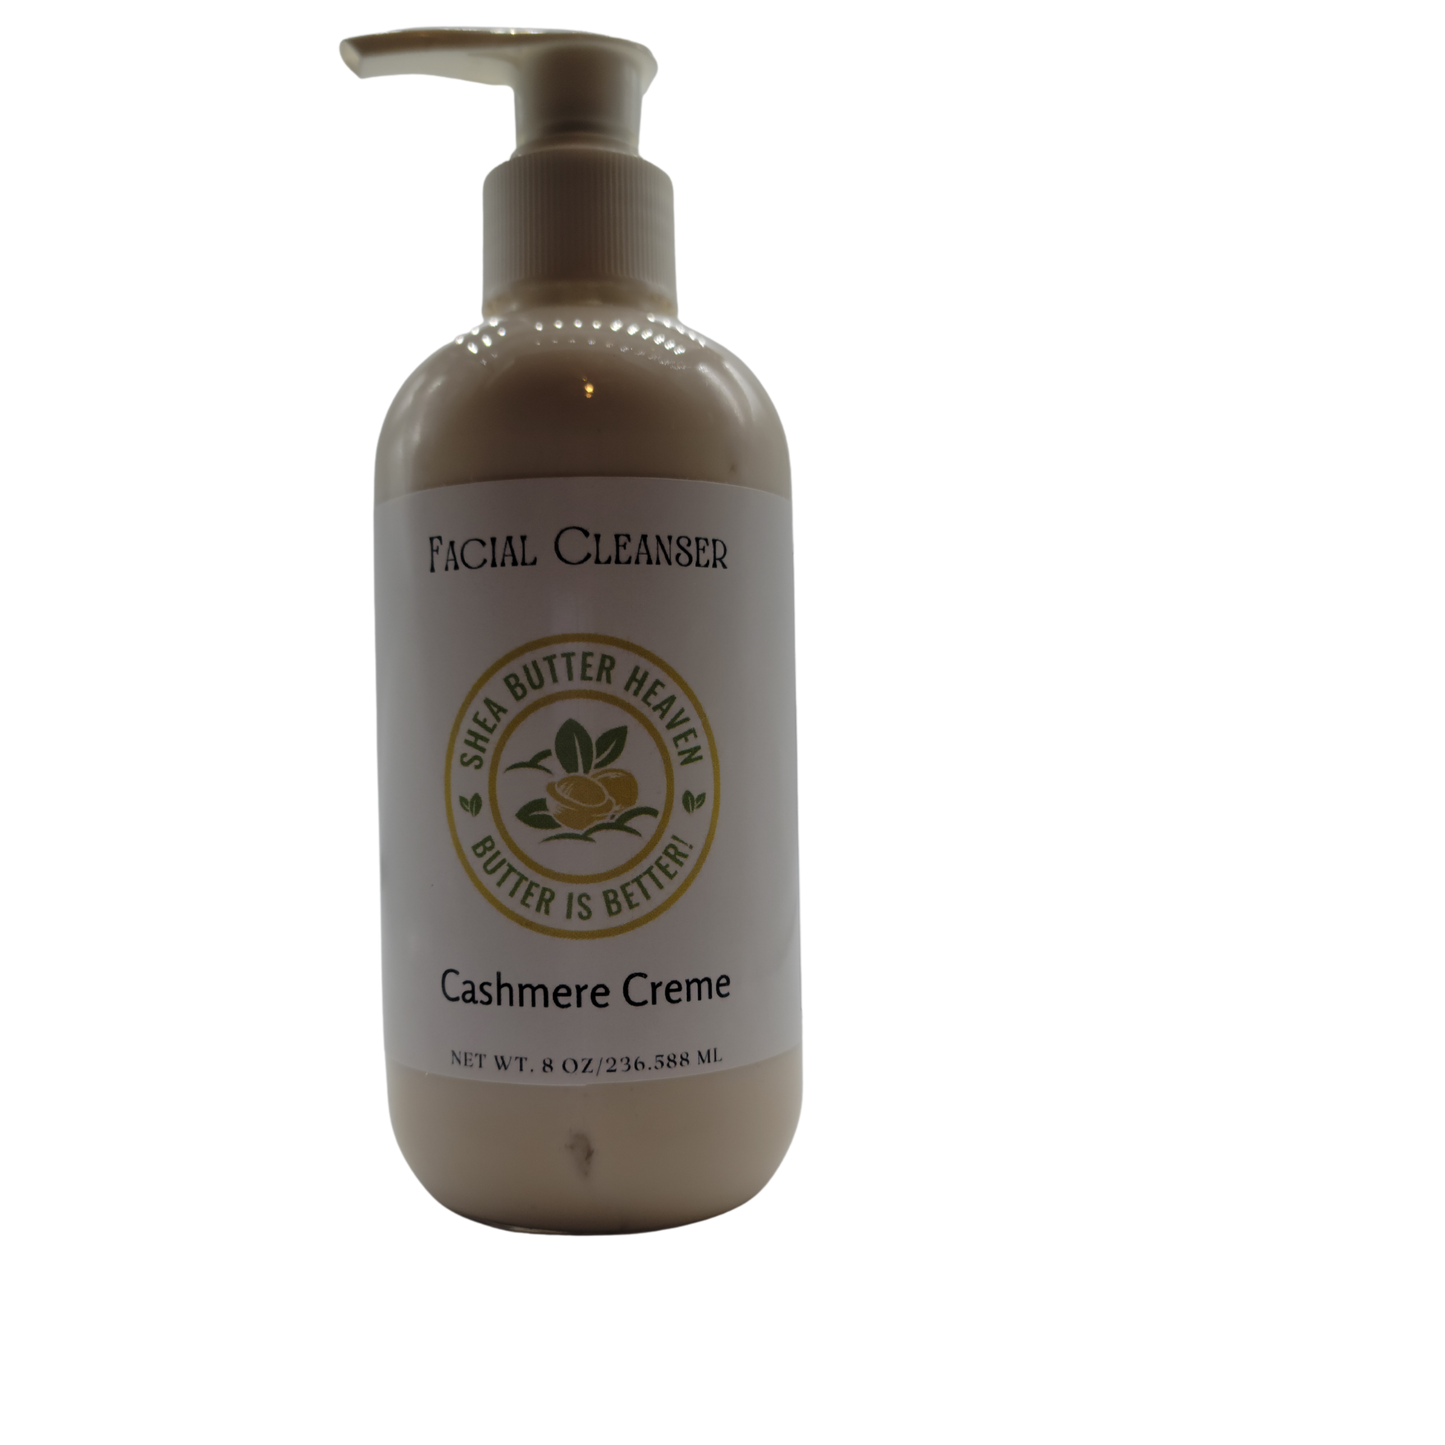 Cashmere Creme smells like a warm cashmere musk, sweet vanilla and soft woods 8 oz facial cleanser